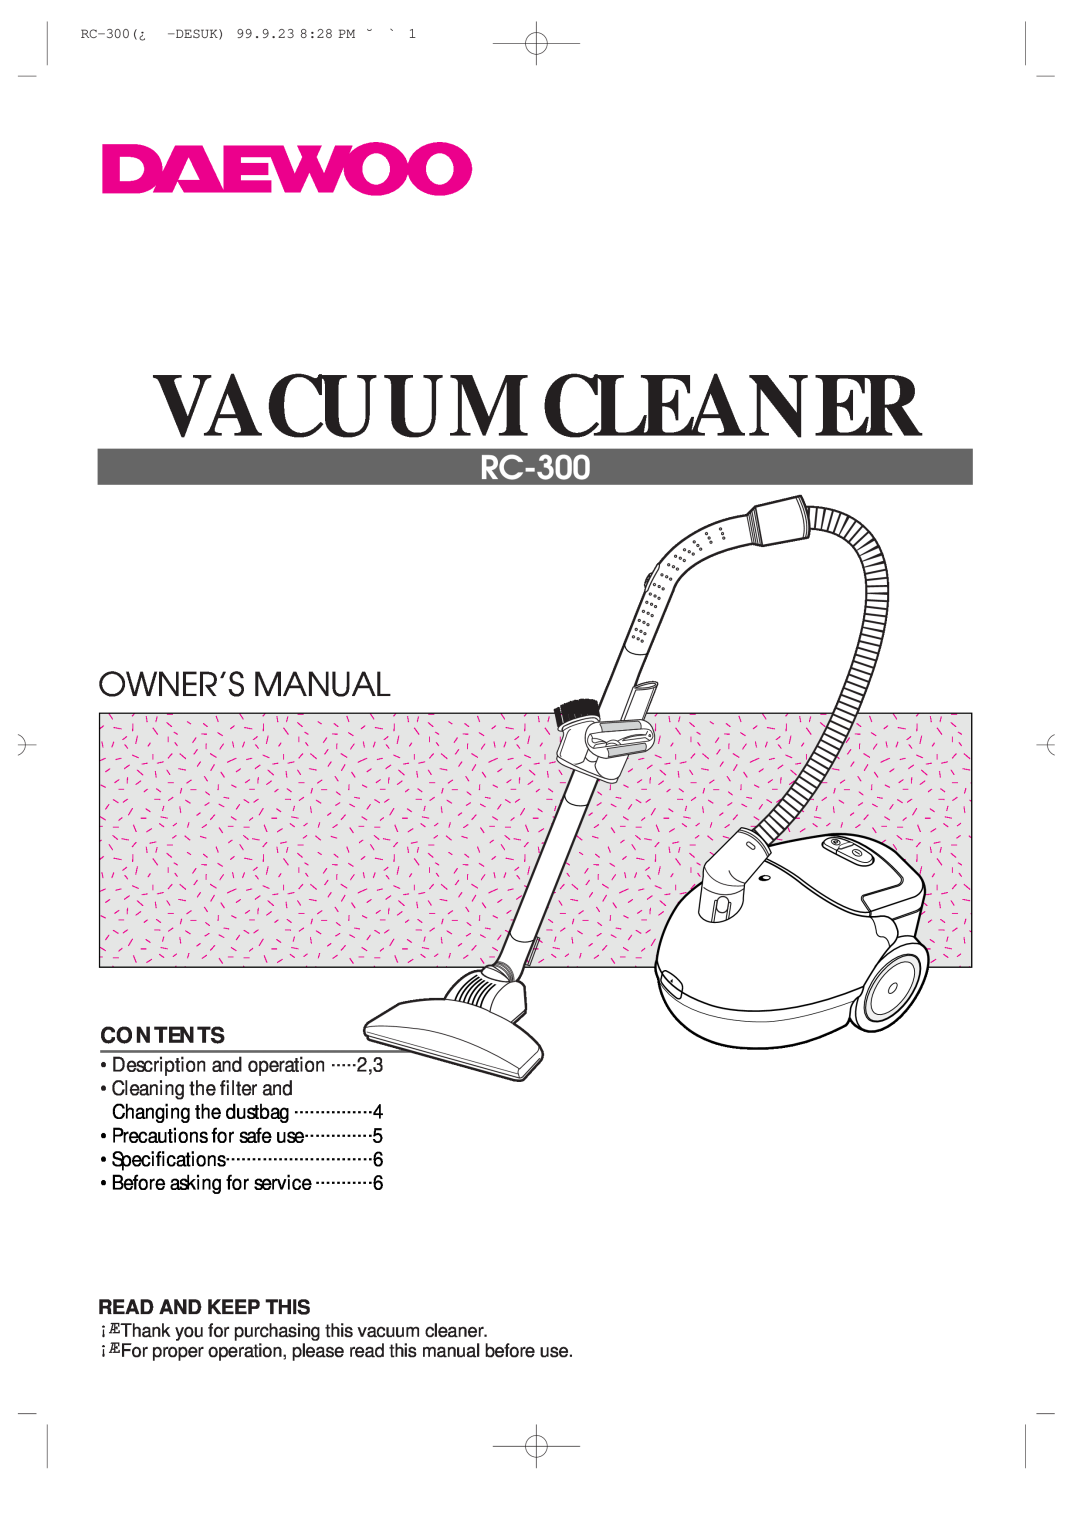 Daewoo RC-300 specifications Read And Keep This, Vacuum Cleaner, Owner’S Manual, Contents, Description and operation 